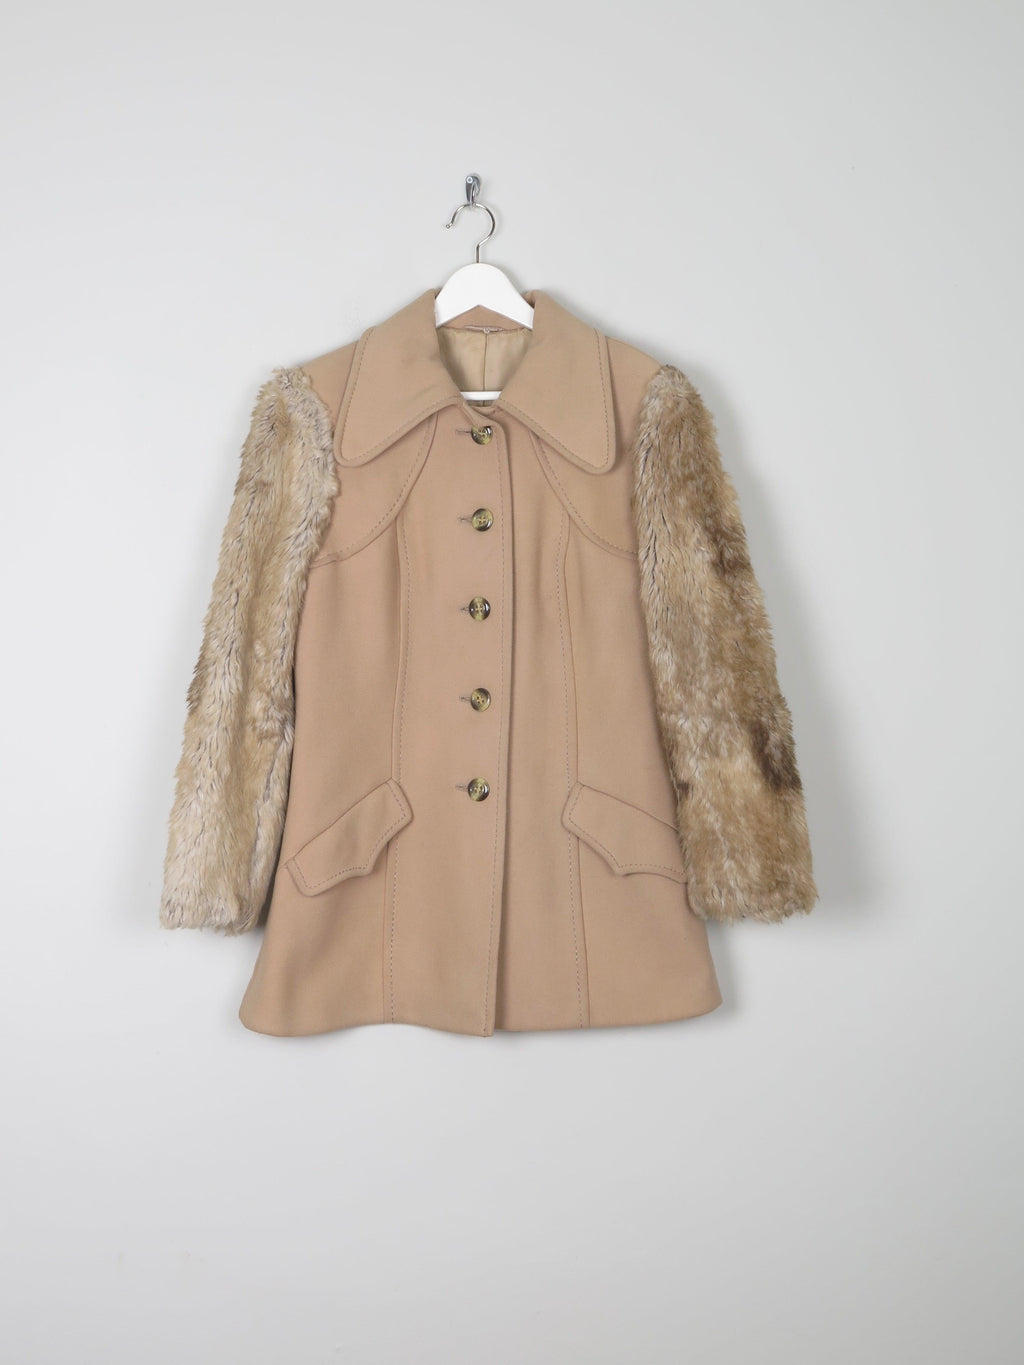 Women's Beige 1970s Short Coat With Faux Fur Sleeves 10/12 - The Harlequin